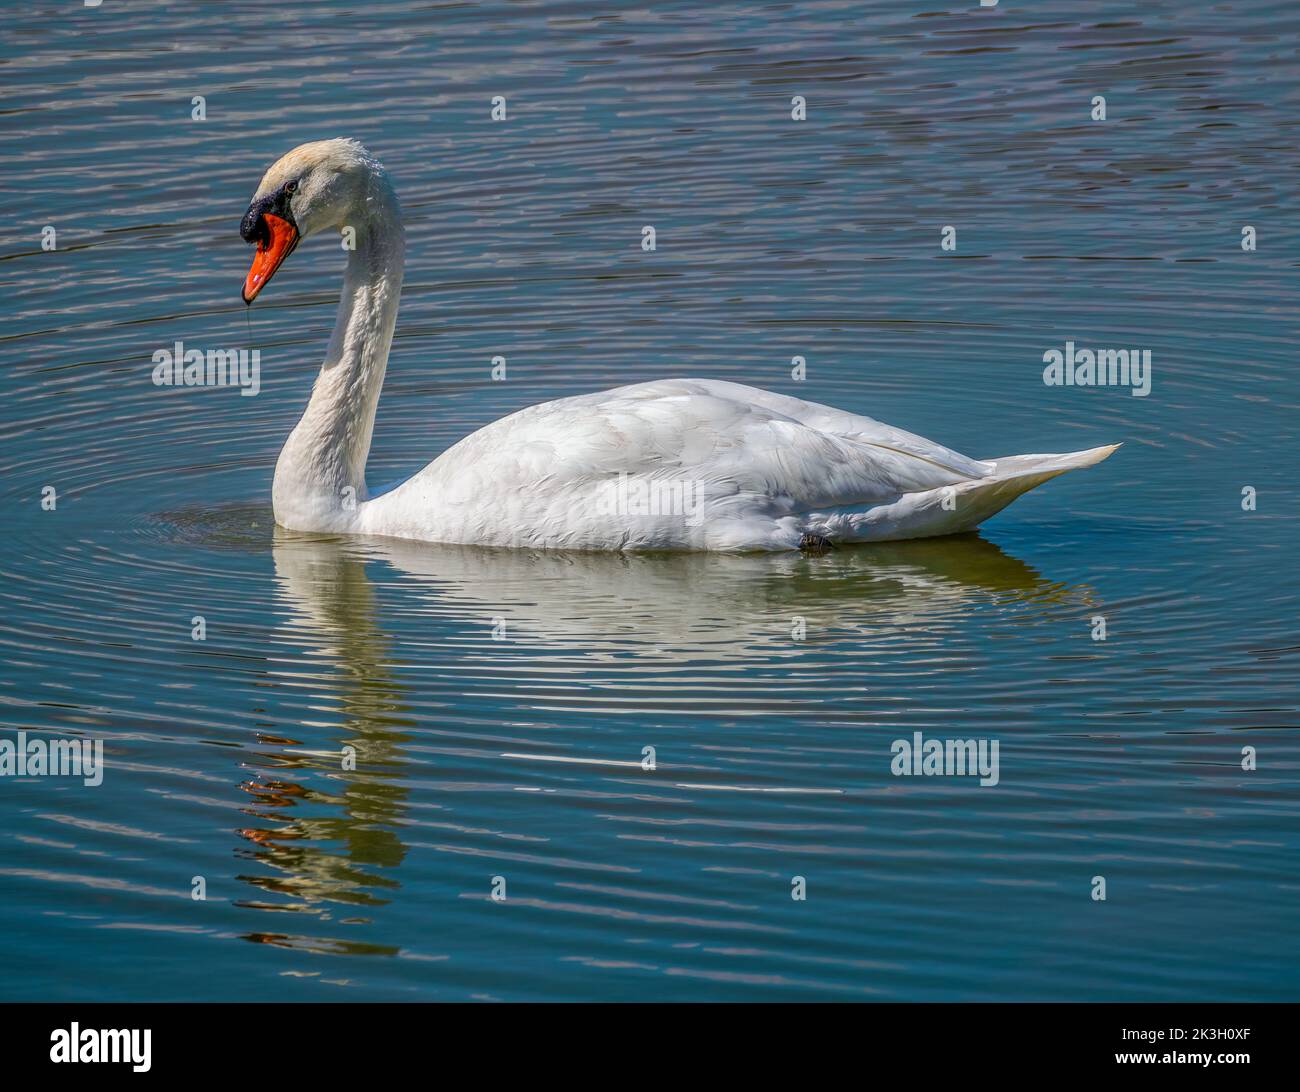 Isolated Mute Swan swimming in a lake Stock Photo